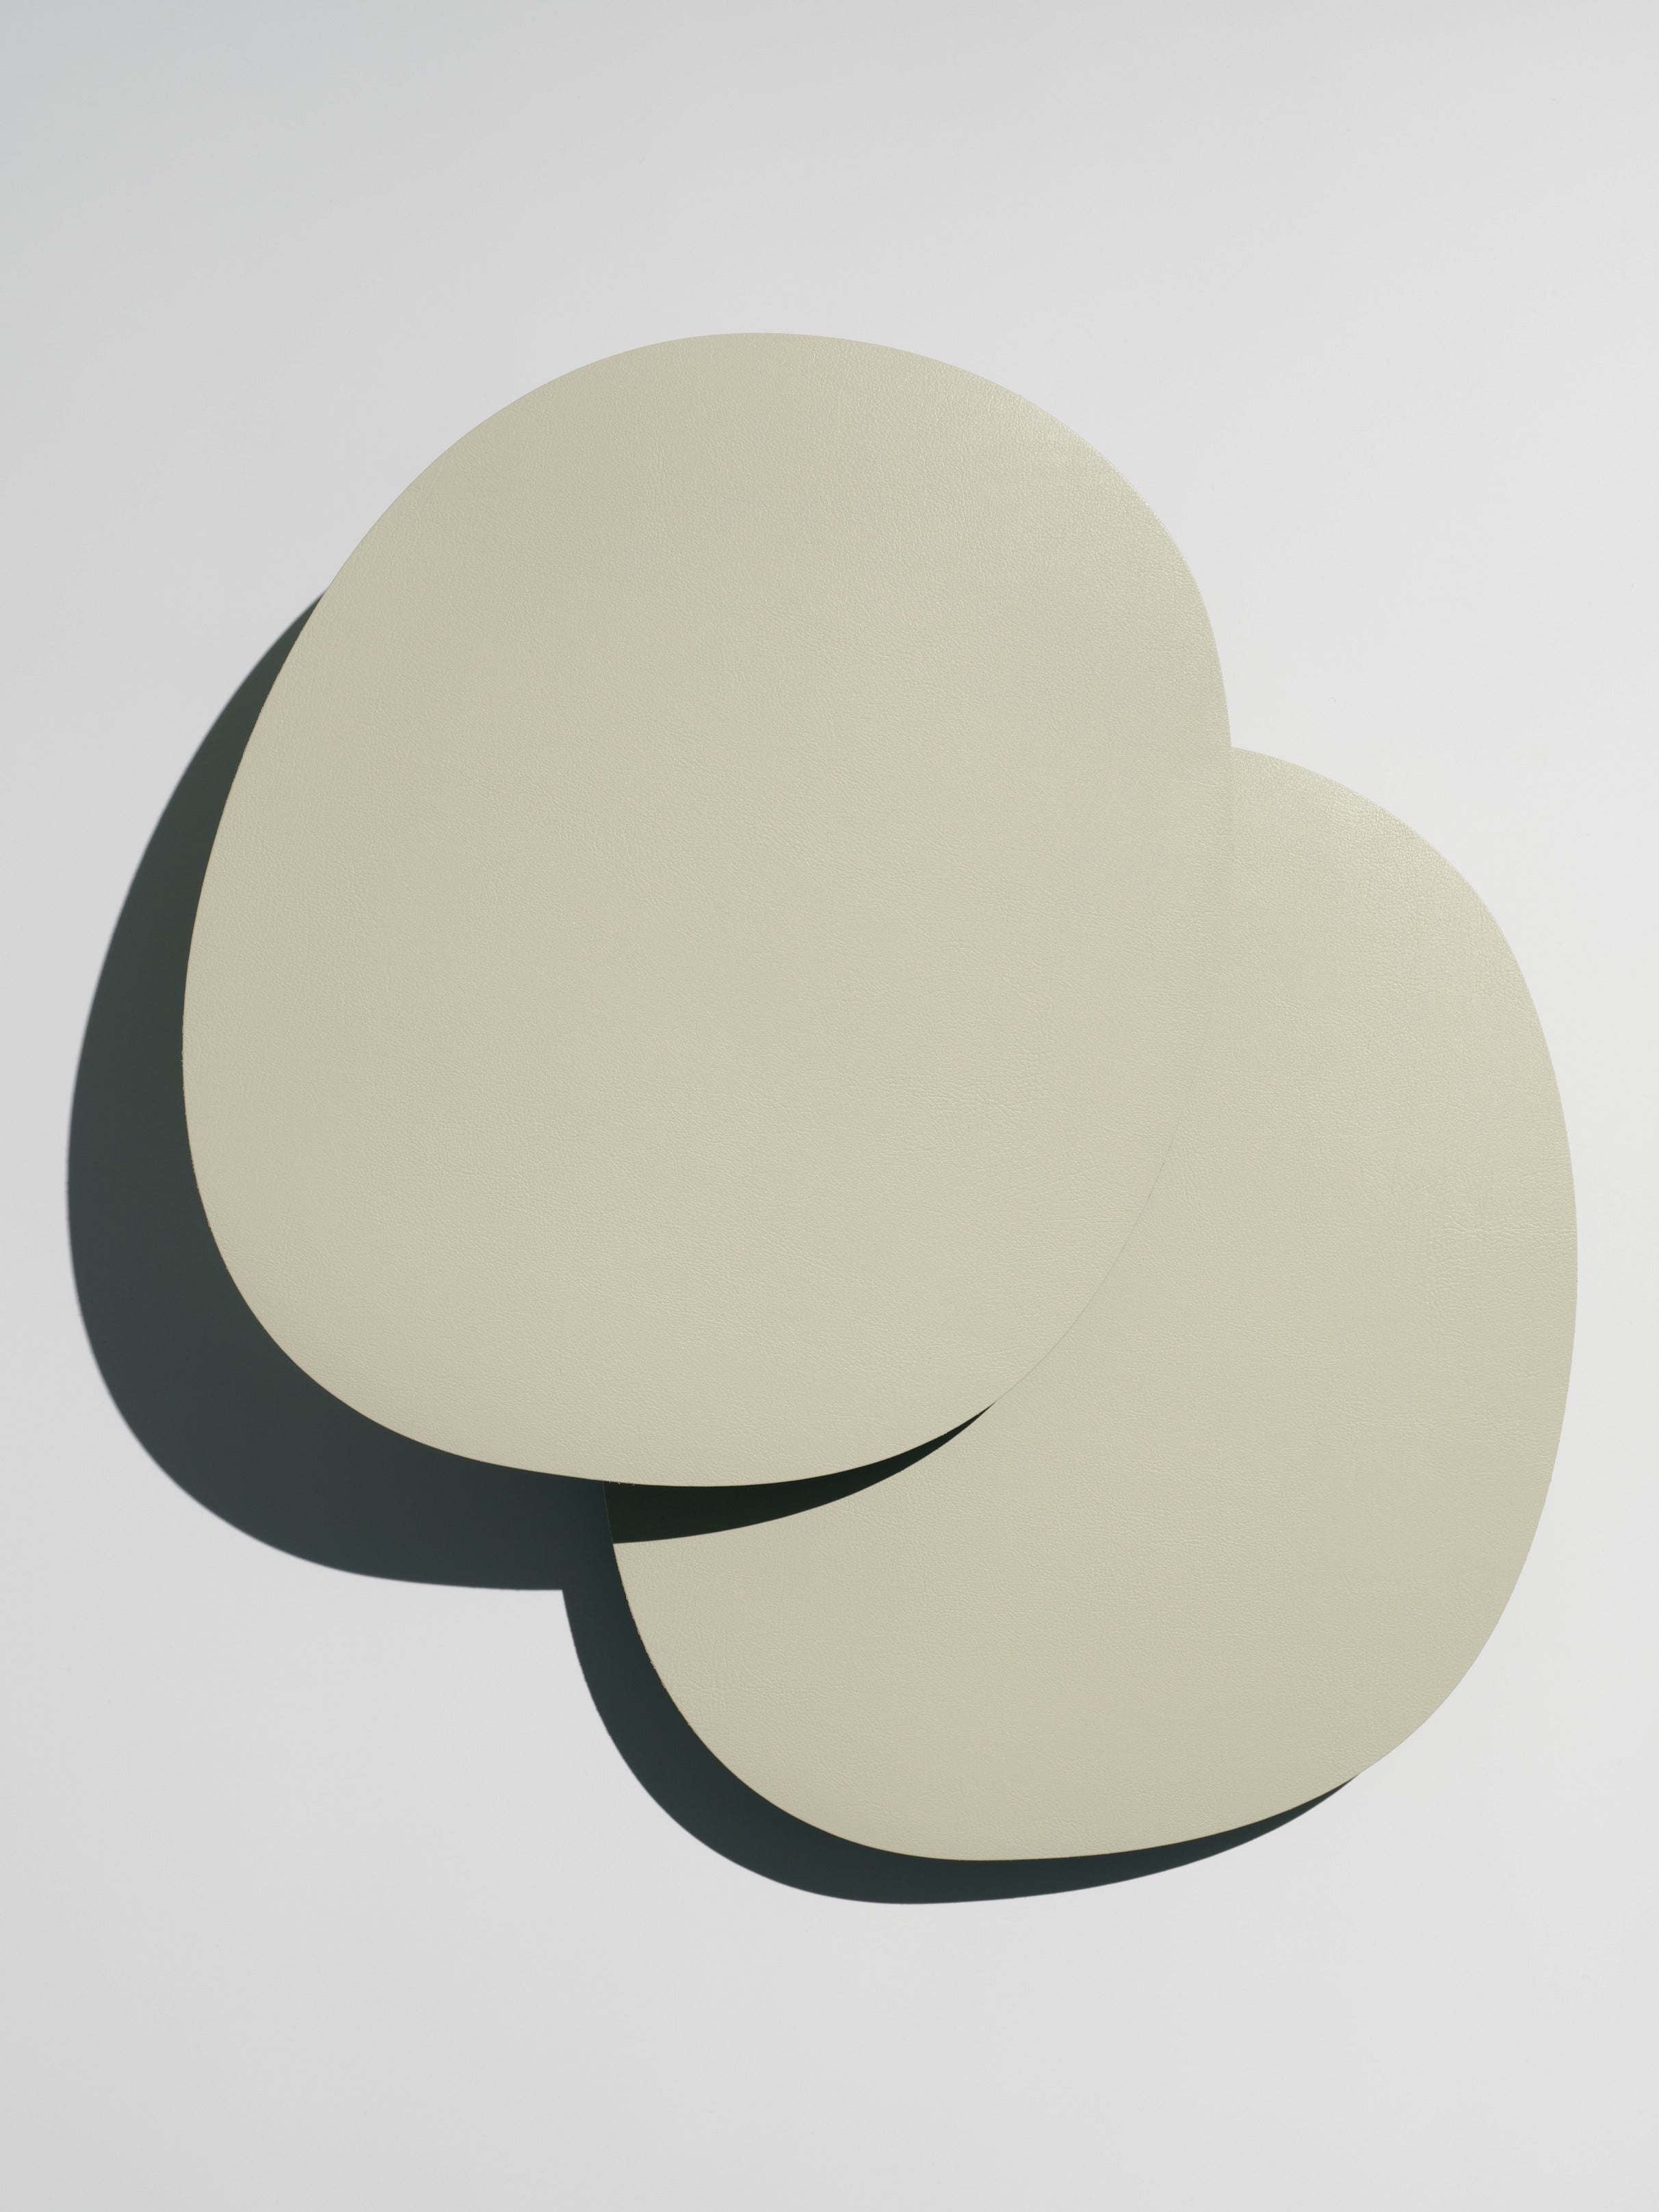 Glass Coaster Sage / Cream Green, Pack of 2